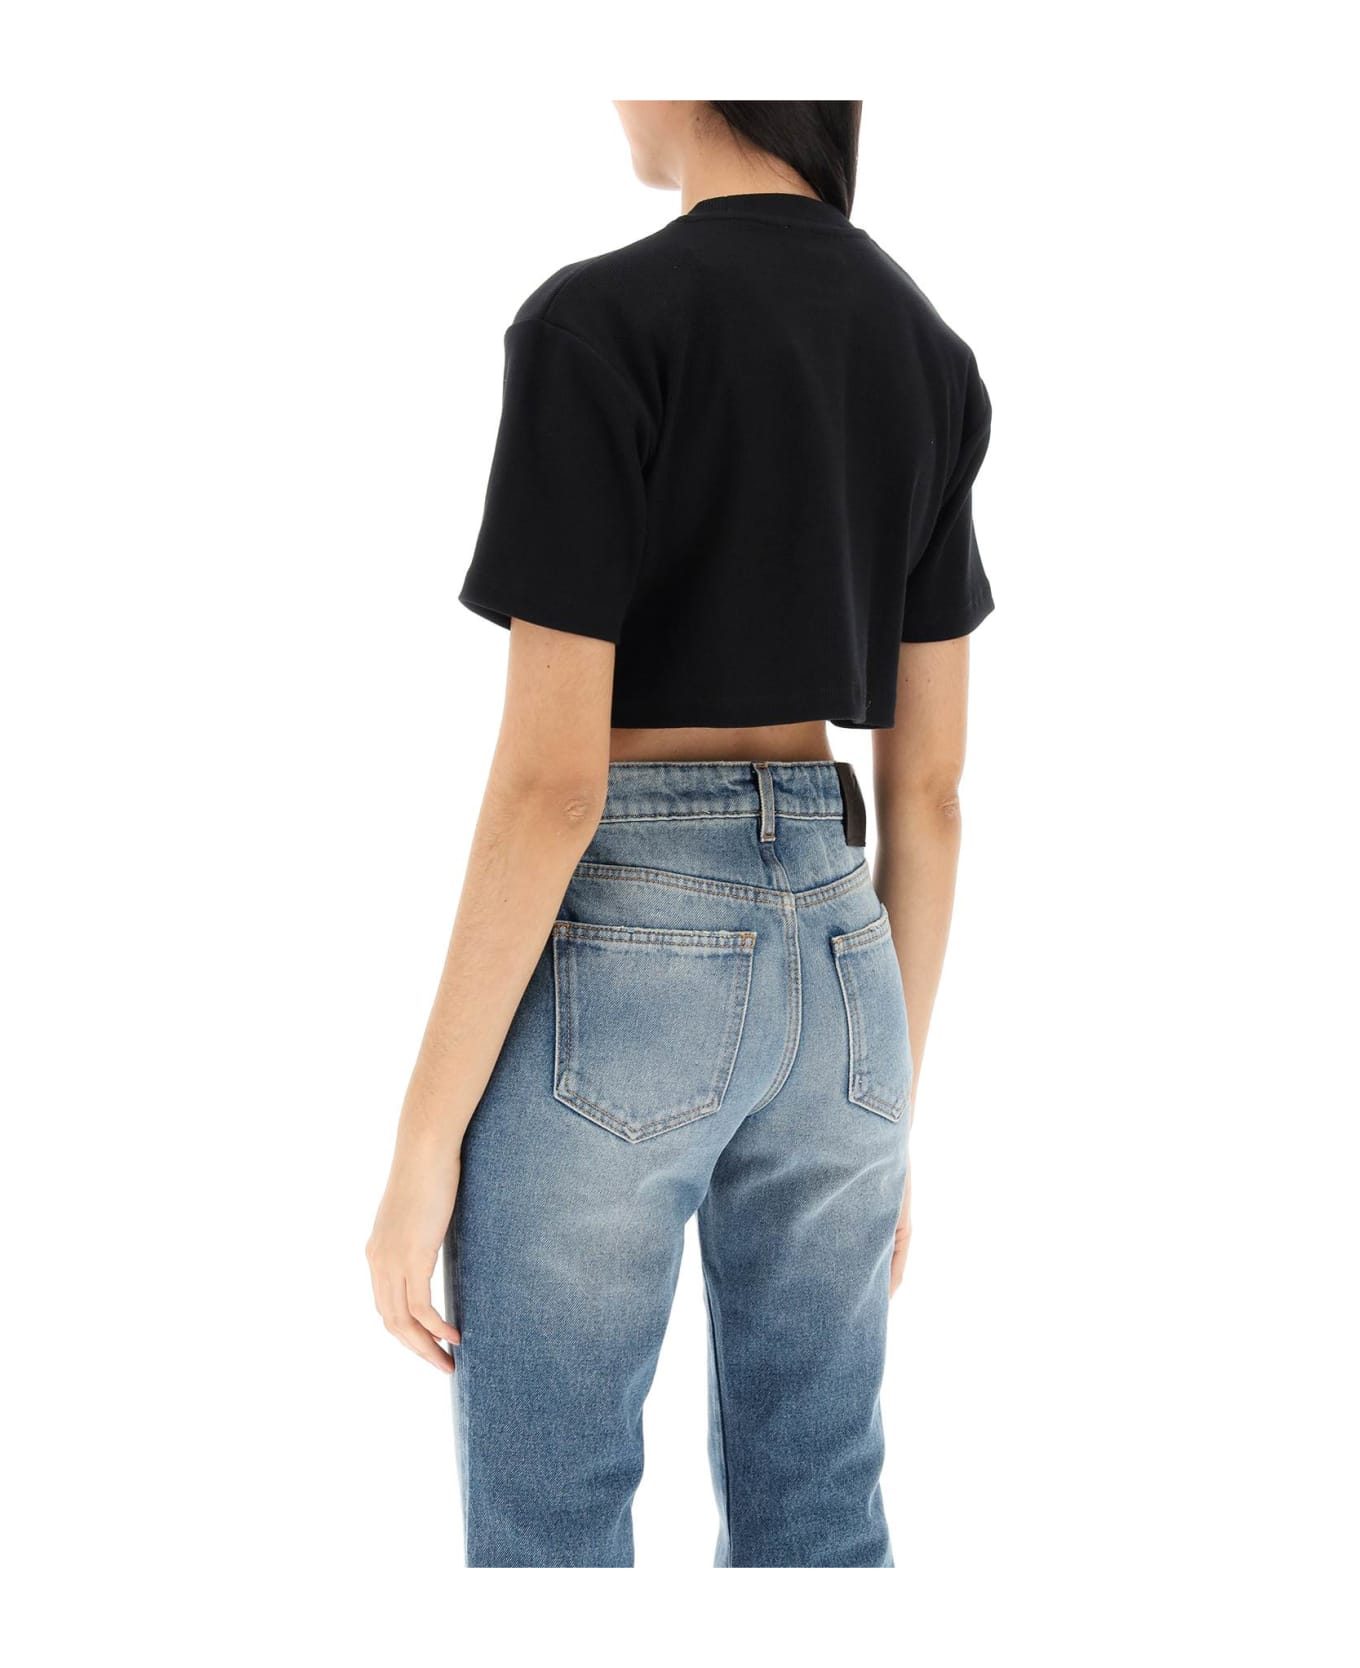 Off-White Cropped T-shirt With Off Embroidery - Black